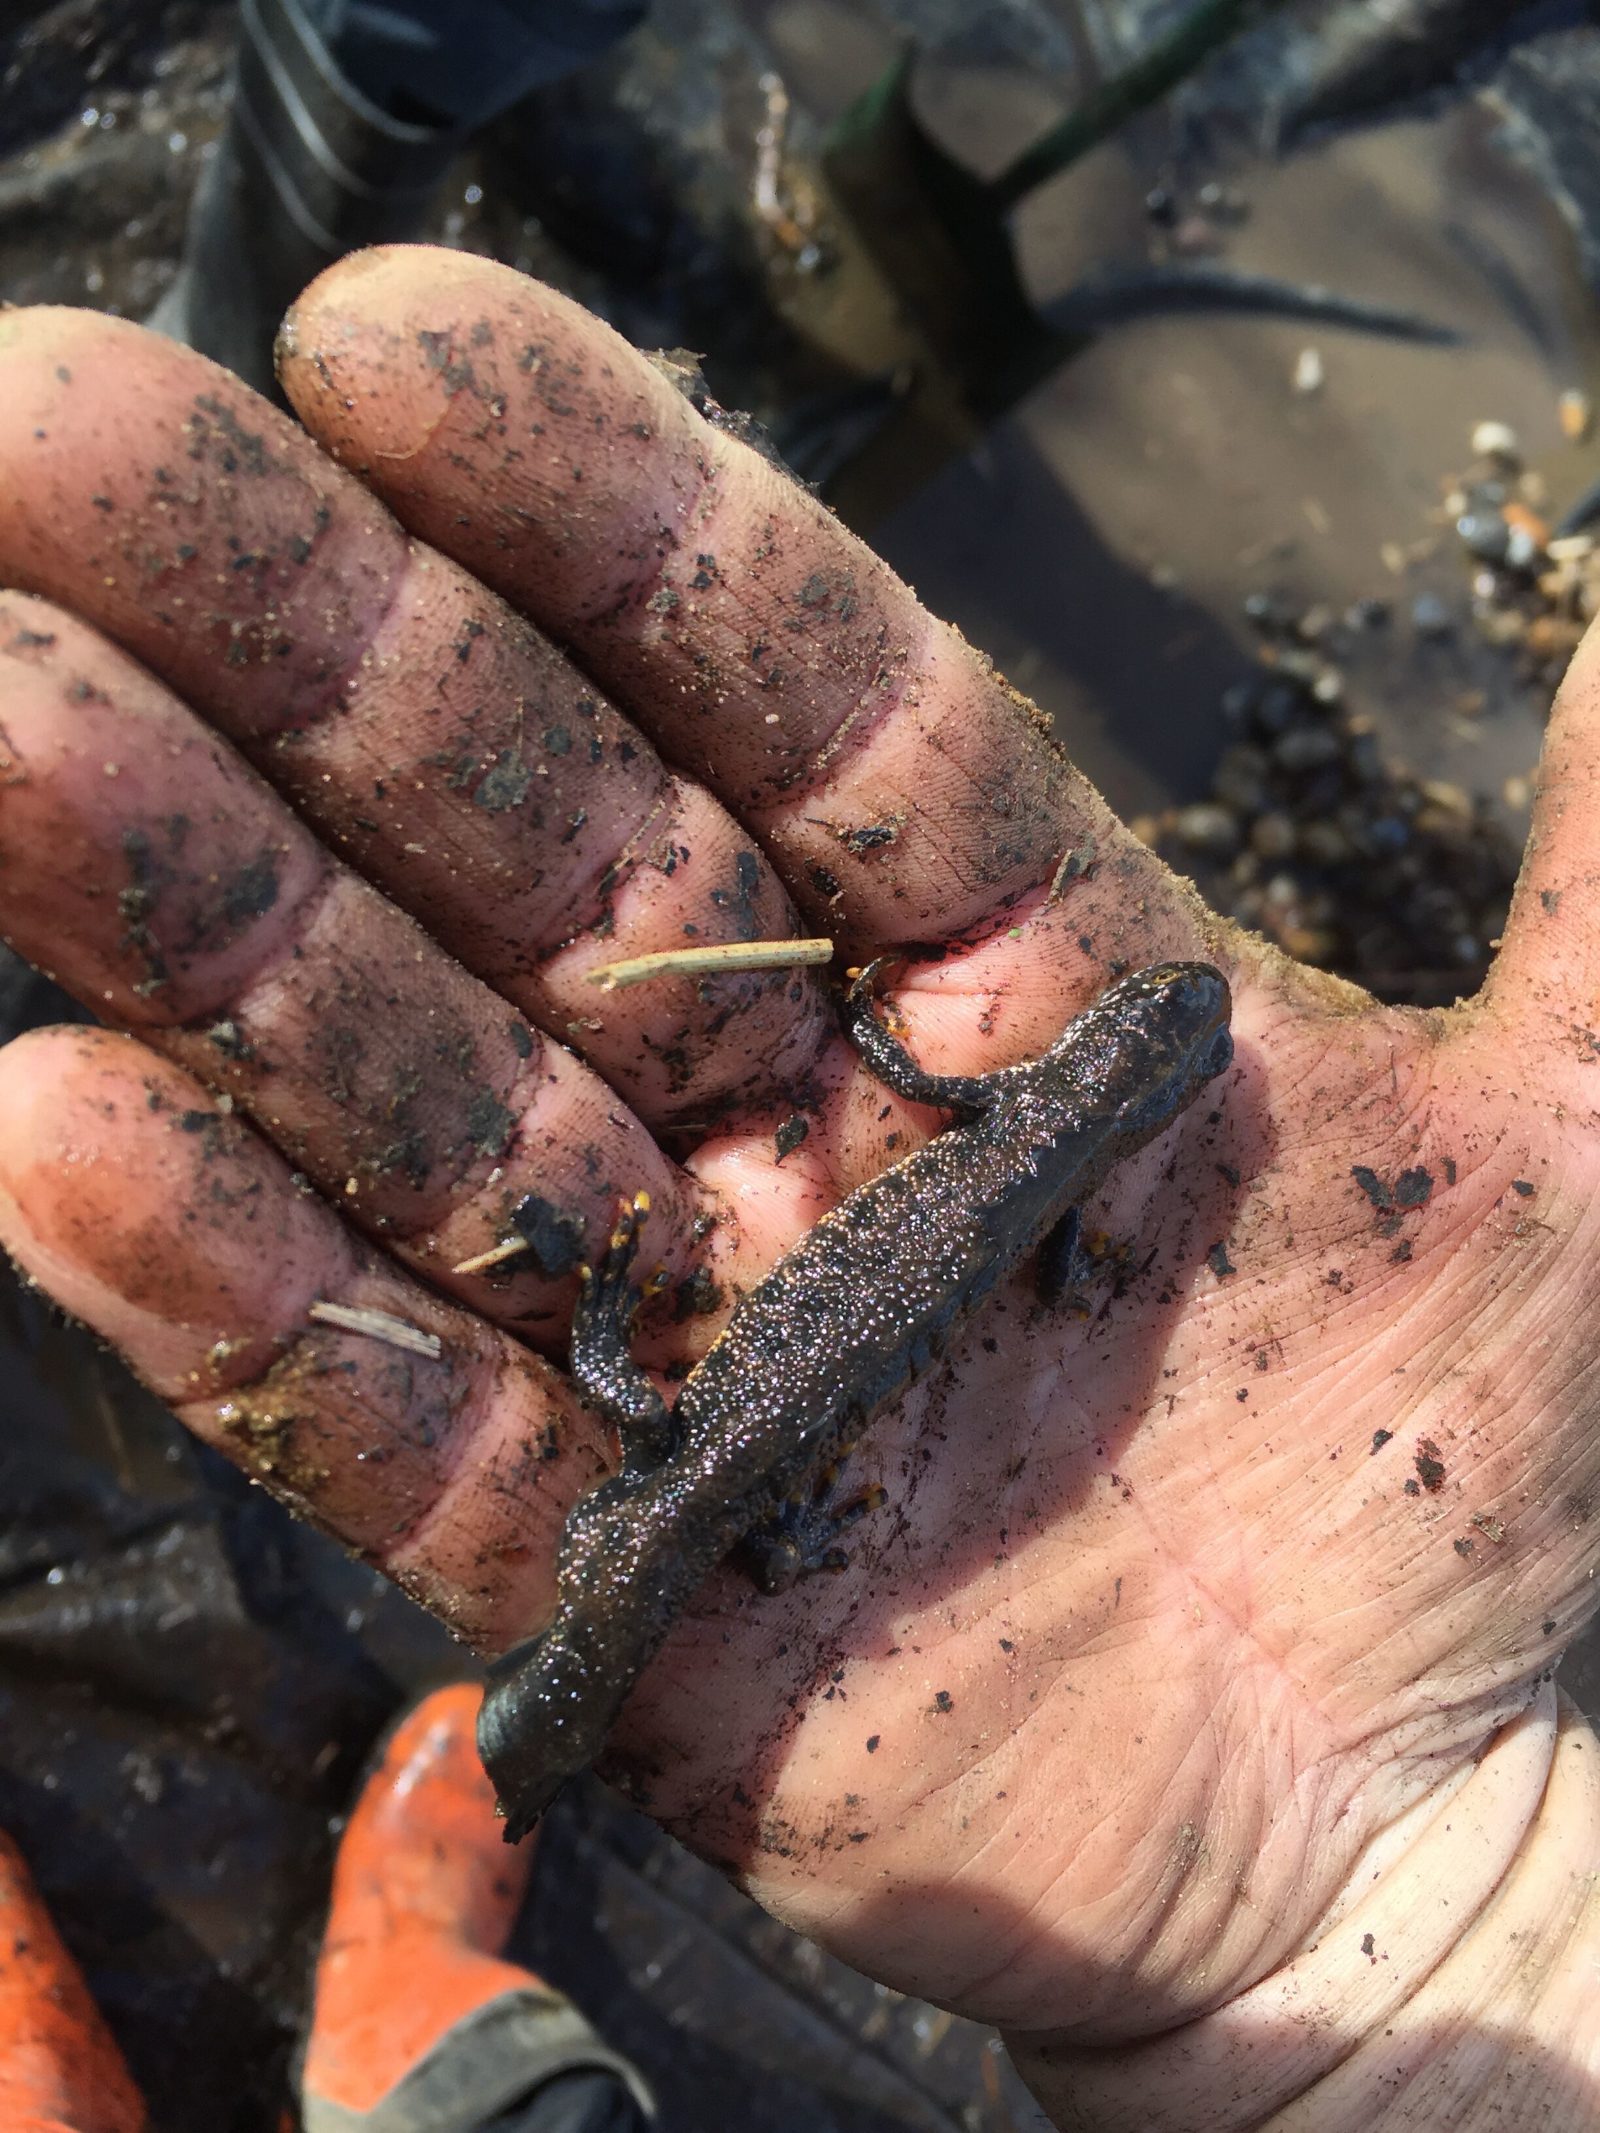 Great-Crested Newt in Hand